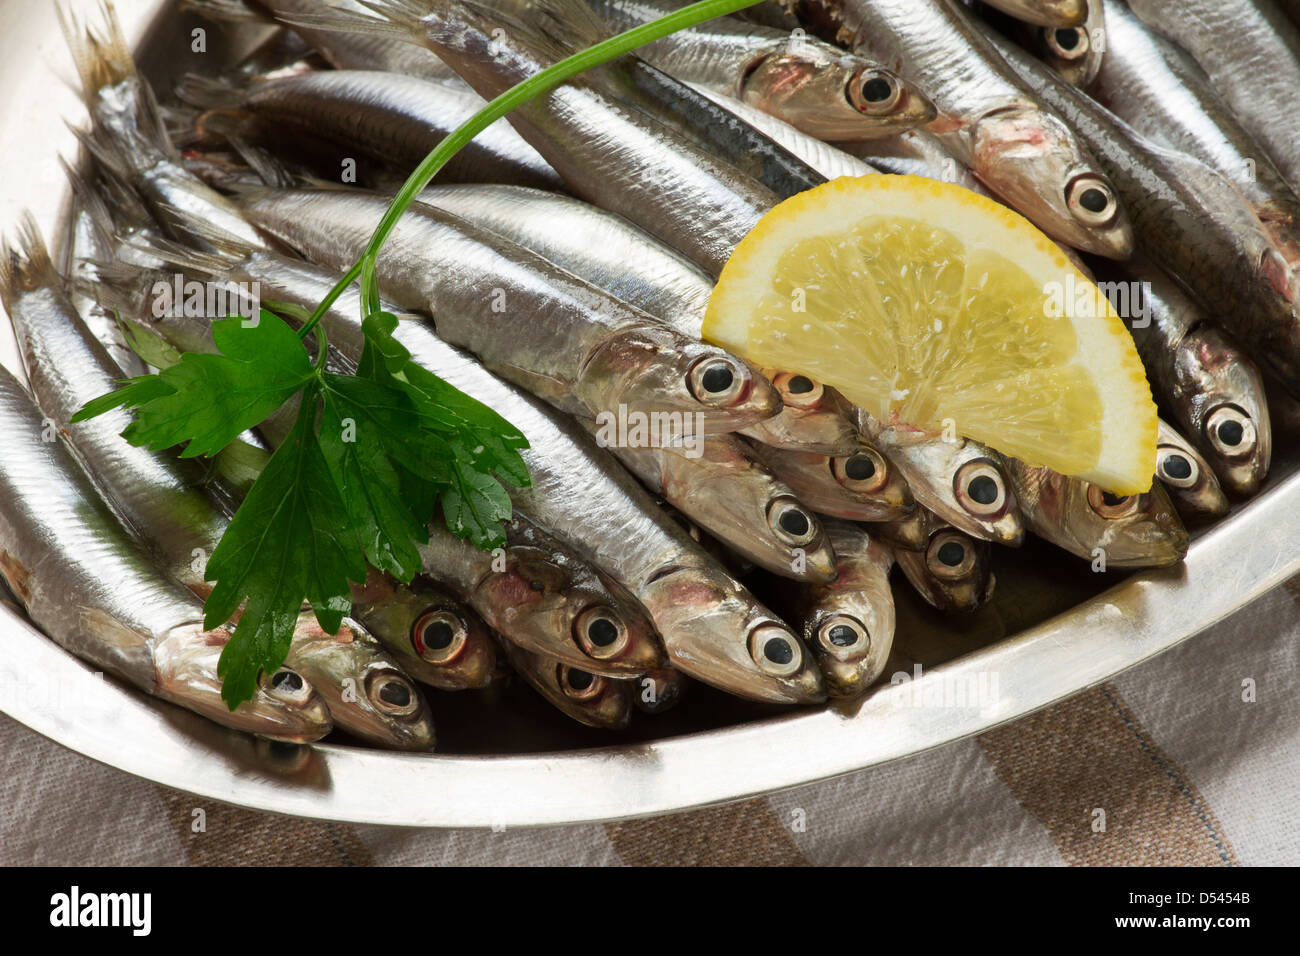 Anchovy.small Mediterranean fish on tray Stock Photo